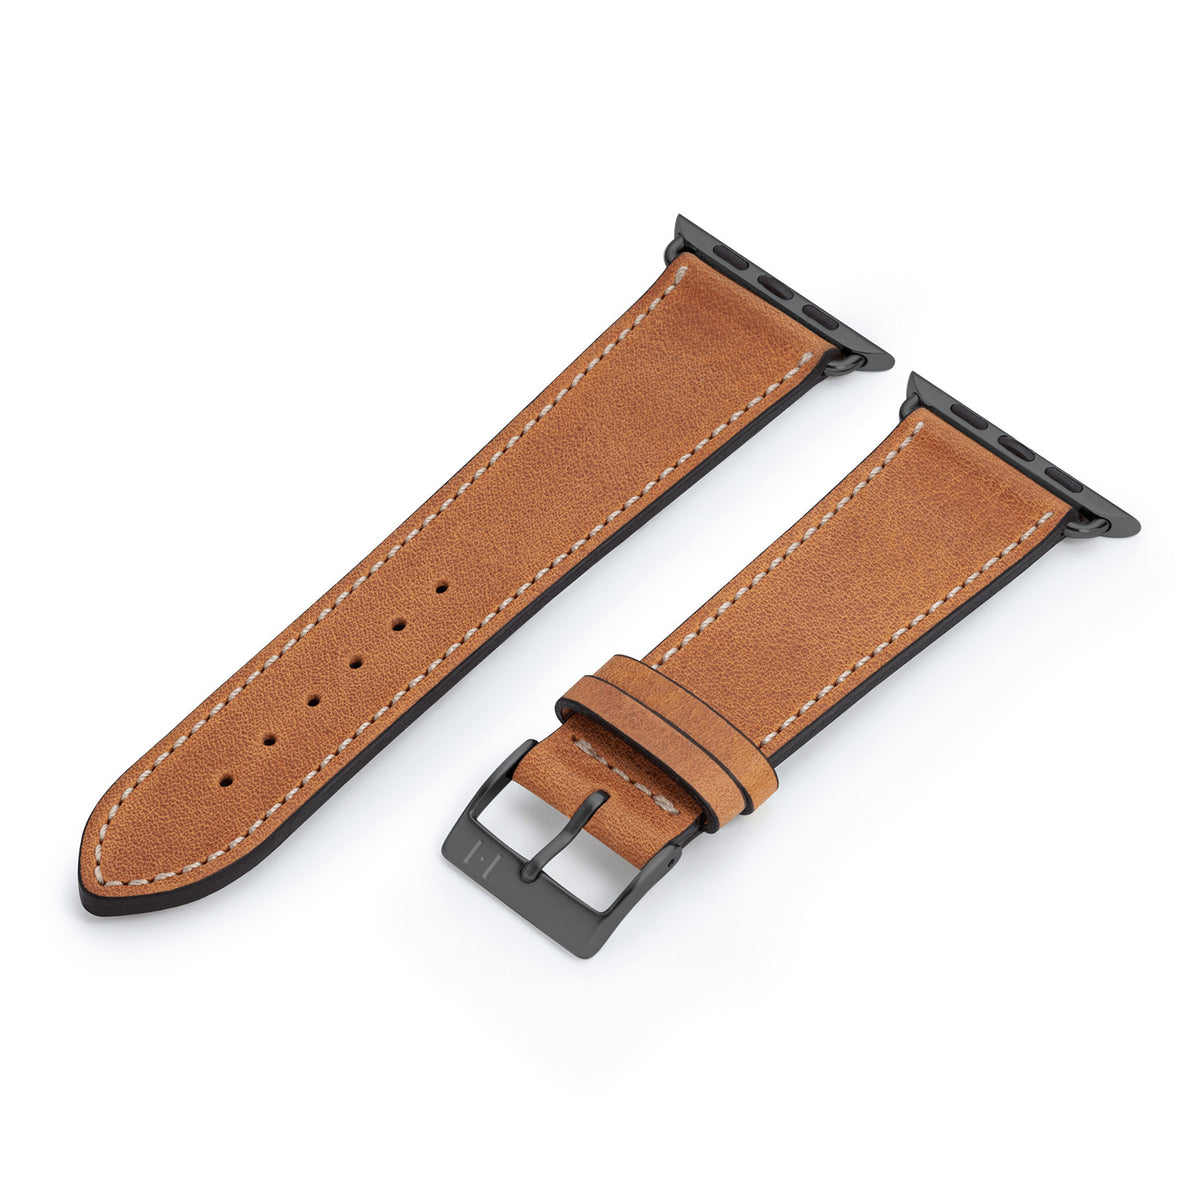 Apple Watch strap made of soft leather “HOHELUFT” – Cognac